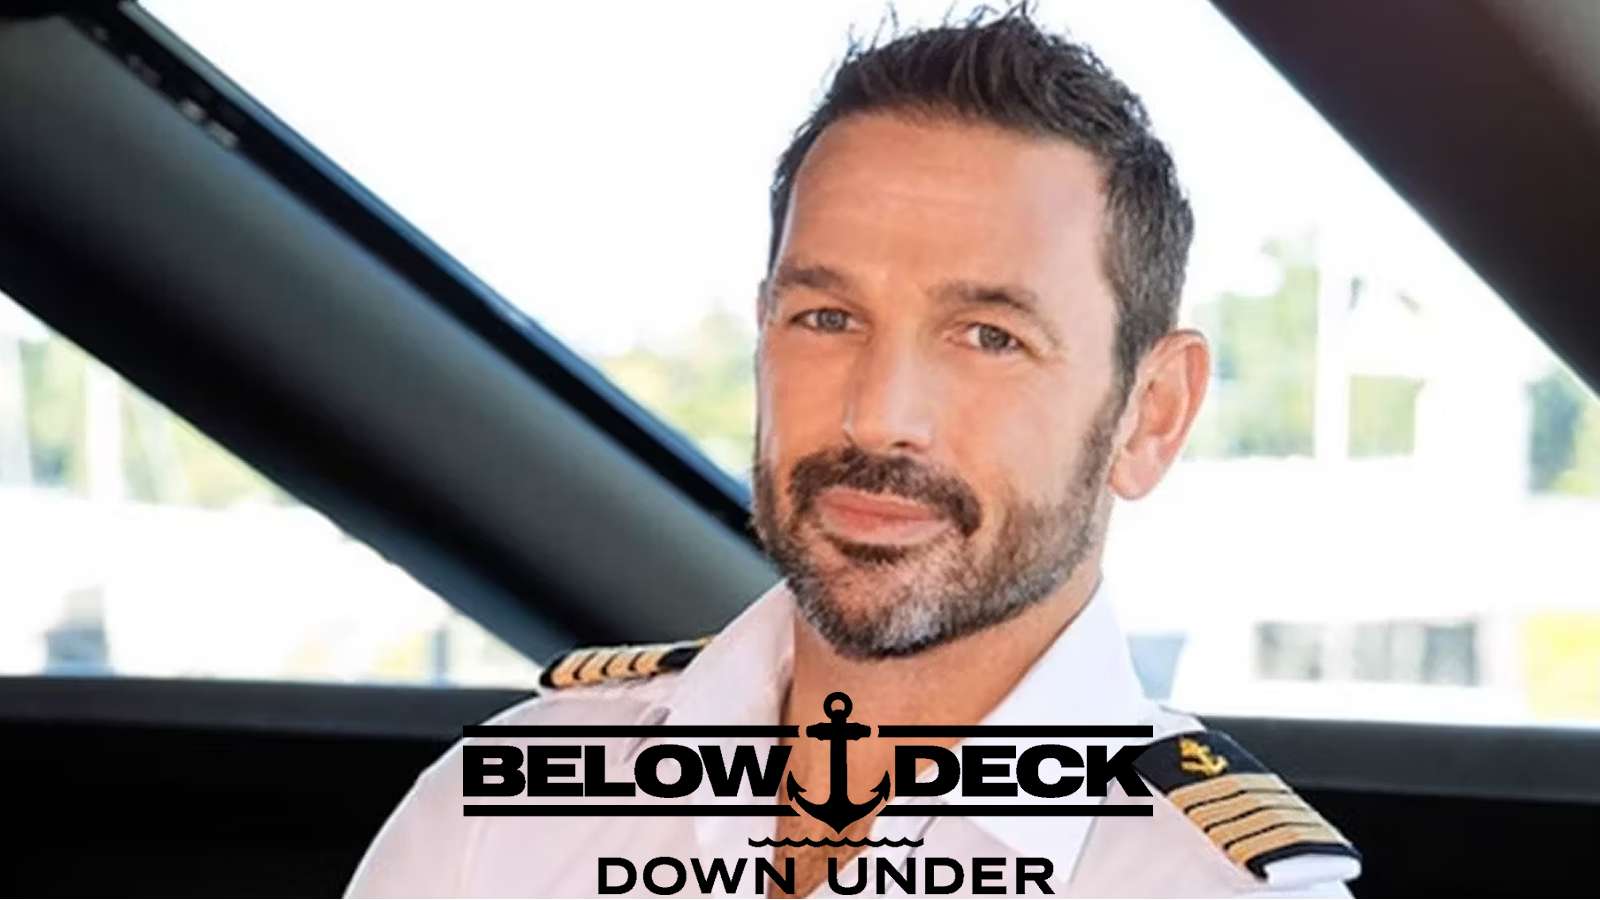 Everything we know about Below Deck Down Under’s Captain Jason Chambers